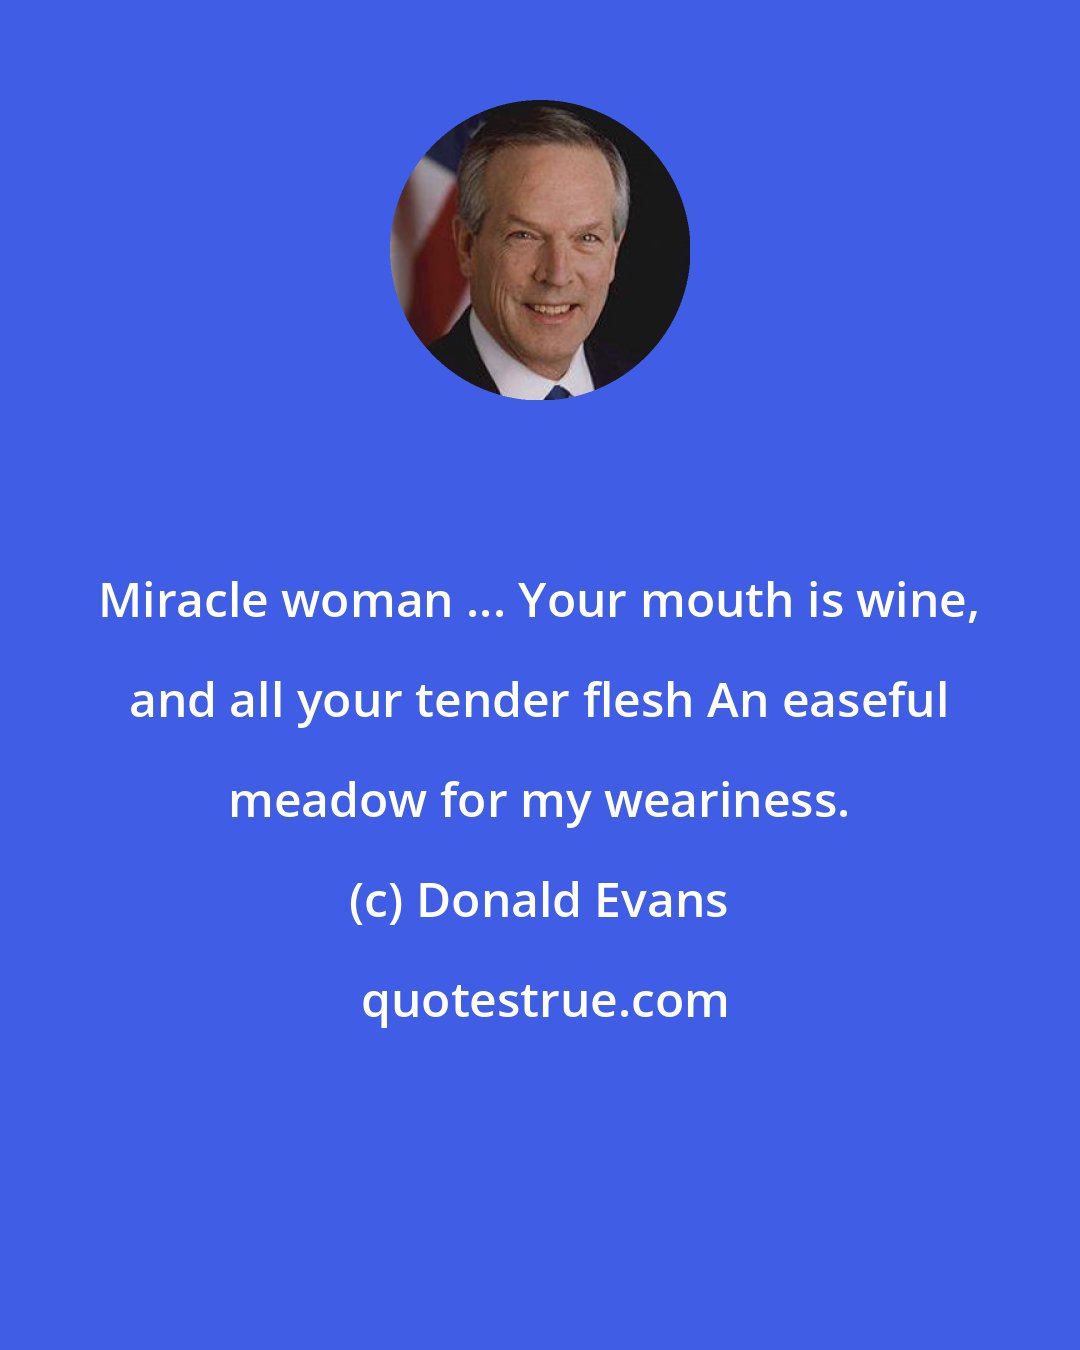 Donald Evans: Miracle woman ... Your mouth is wine, and all your tender flesh An easeful meadow for my weariness.